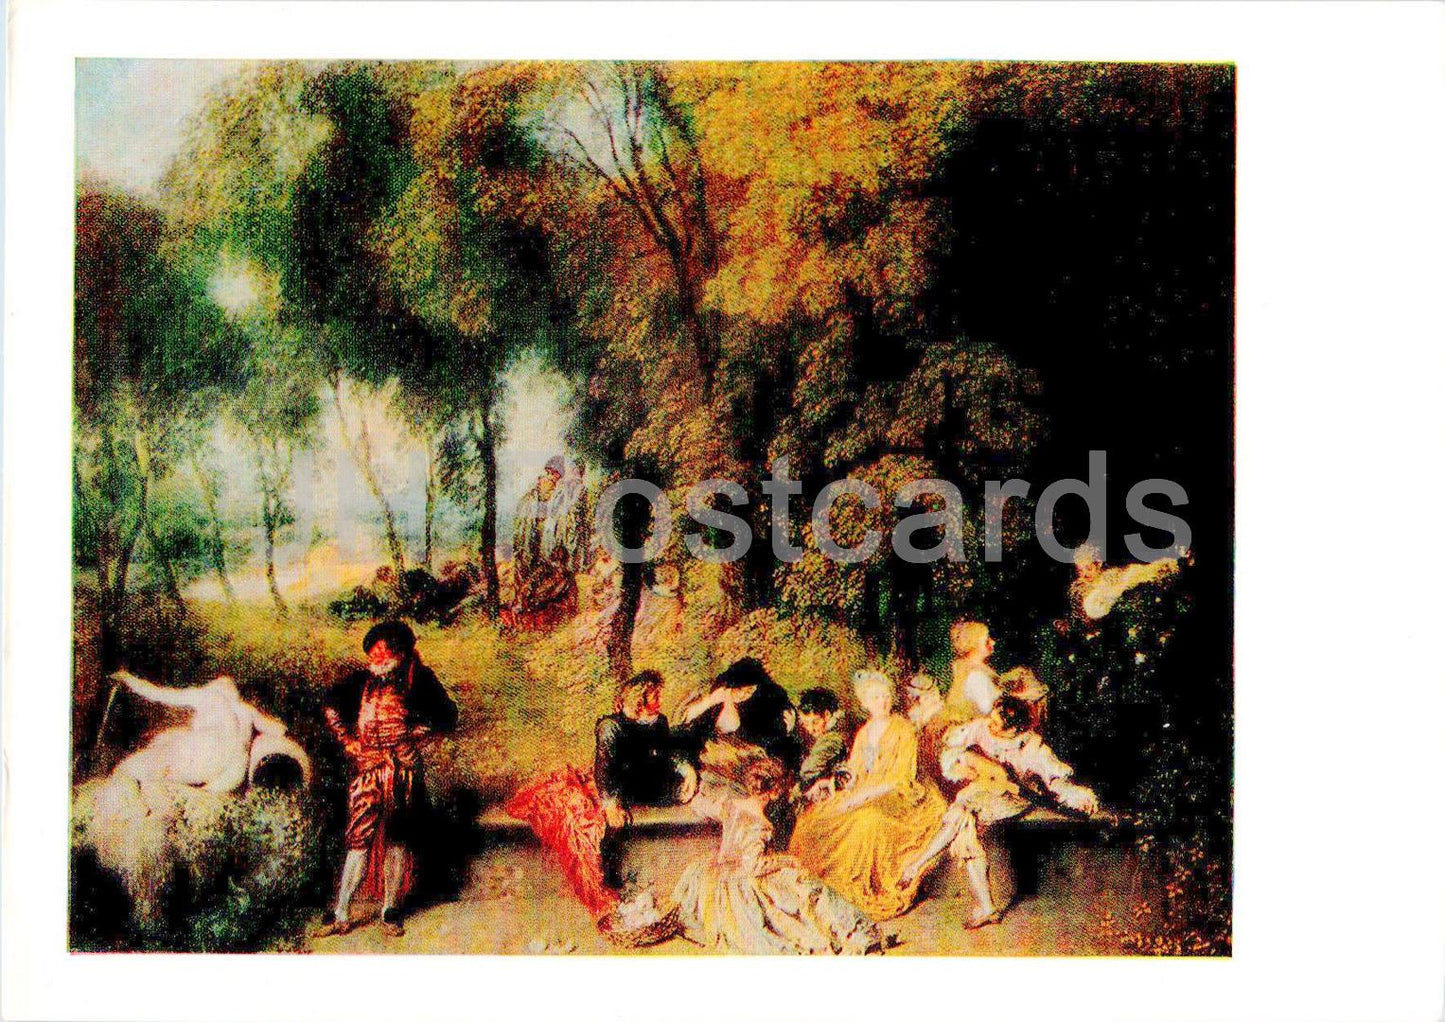 painting by Antoine Watteau - People in the Park - French art - 1985 - Russia USSR - unused